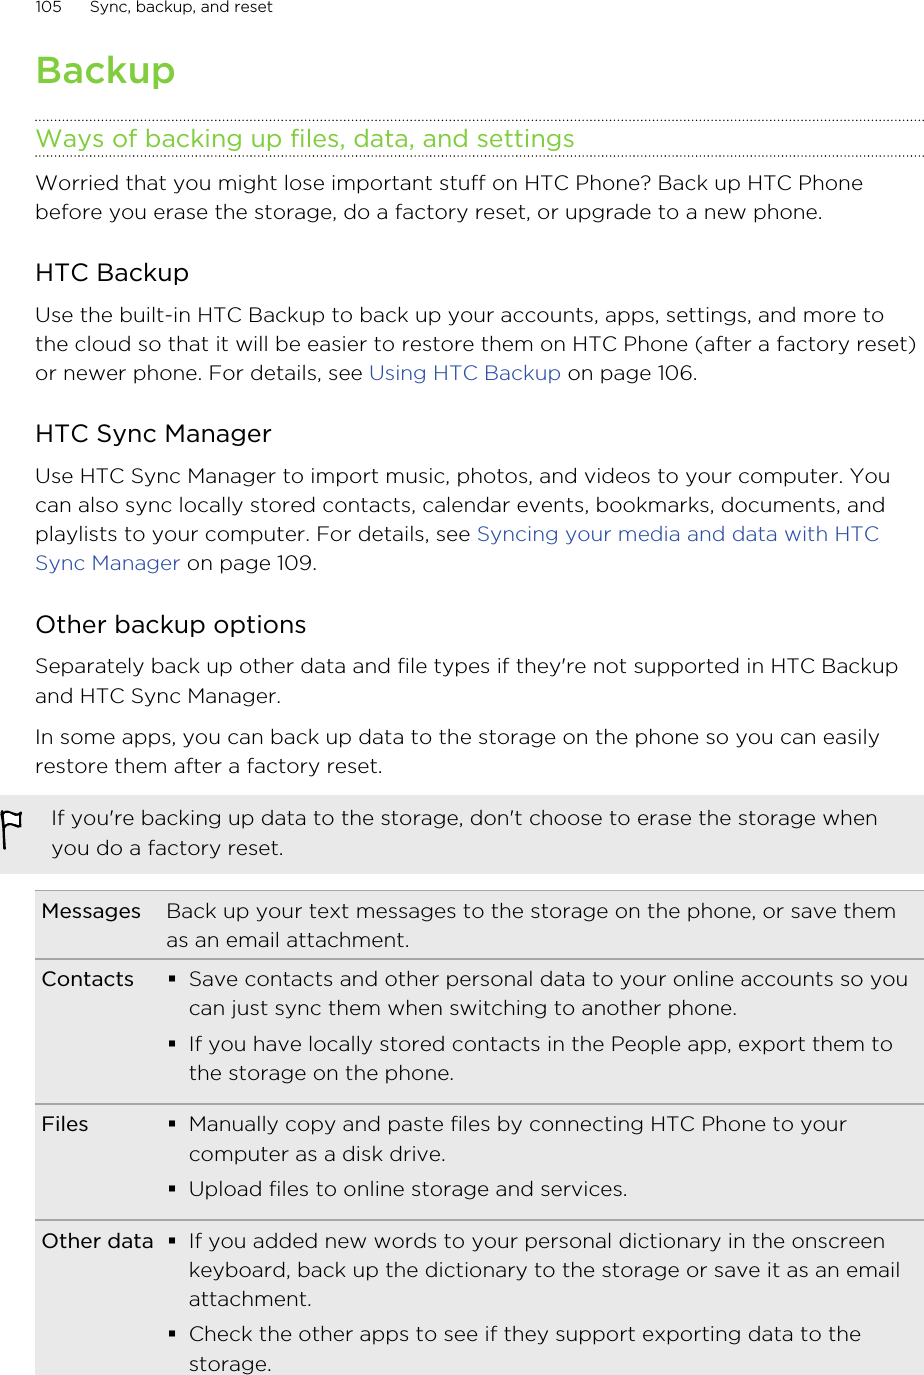 BackupWays of backing up files, data, and settingsWorried that you might lose important stuff on HTC Phone? Back up HTC Phonebefore you erase the storage, do a factory reset, or upgrade to a new phone.HTC BackupUse the built-in HTC Backup to back up your accounts, apps, settings, and more tothe cloud so that it will be easier to restore them on HTC Phone (after a factory reset)or newer phone. For details, see Using HTC Backup on page 106.HTC Sync ManagerUse HTC Sync Manager to import music, photos, and videos to your computer. Youcan also sync locally stored contacts, calendar events, bookmarks, documents, andplaylists to your computer. For details, see Syncing your media and data with HTCSync Manager on page 109.Other backup optionsSeparately back up other data and file types if they&apos;re not supported in HTC Backupand HTC Sync Manager.In some apps, you can back up data to the storage on the phone so you can easilyrestore them after a factory reset.If you&apos;re backing up data to the storage, don&apos;t choose to erase the storage whenyou do a factory reset.Messages Back up your text messages to the storage on the phone, or save themas an email attachment.Contacts §Save contacts and other personal data to your online accounts so youcan just sync them when switching to another phone.§If you have locally stored contacts in the People app, export them tothe storage on the phone.Files §Manually copy and paste files by connecting HTC Phone to yourcomputer as a disk drive.§Upload files to online storage and services.Other data §If you added new words to your personal dictionary in the onscreenkeyboard, back up the dictionary to the storage or save it as an emailattachment.§Check the other apps to see if they support exporting data to thestorage.105 Sync, backup, and resetHTC Confidential for Certification HTC Confidential for Certification 